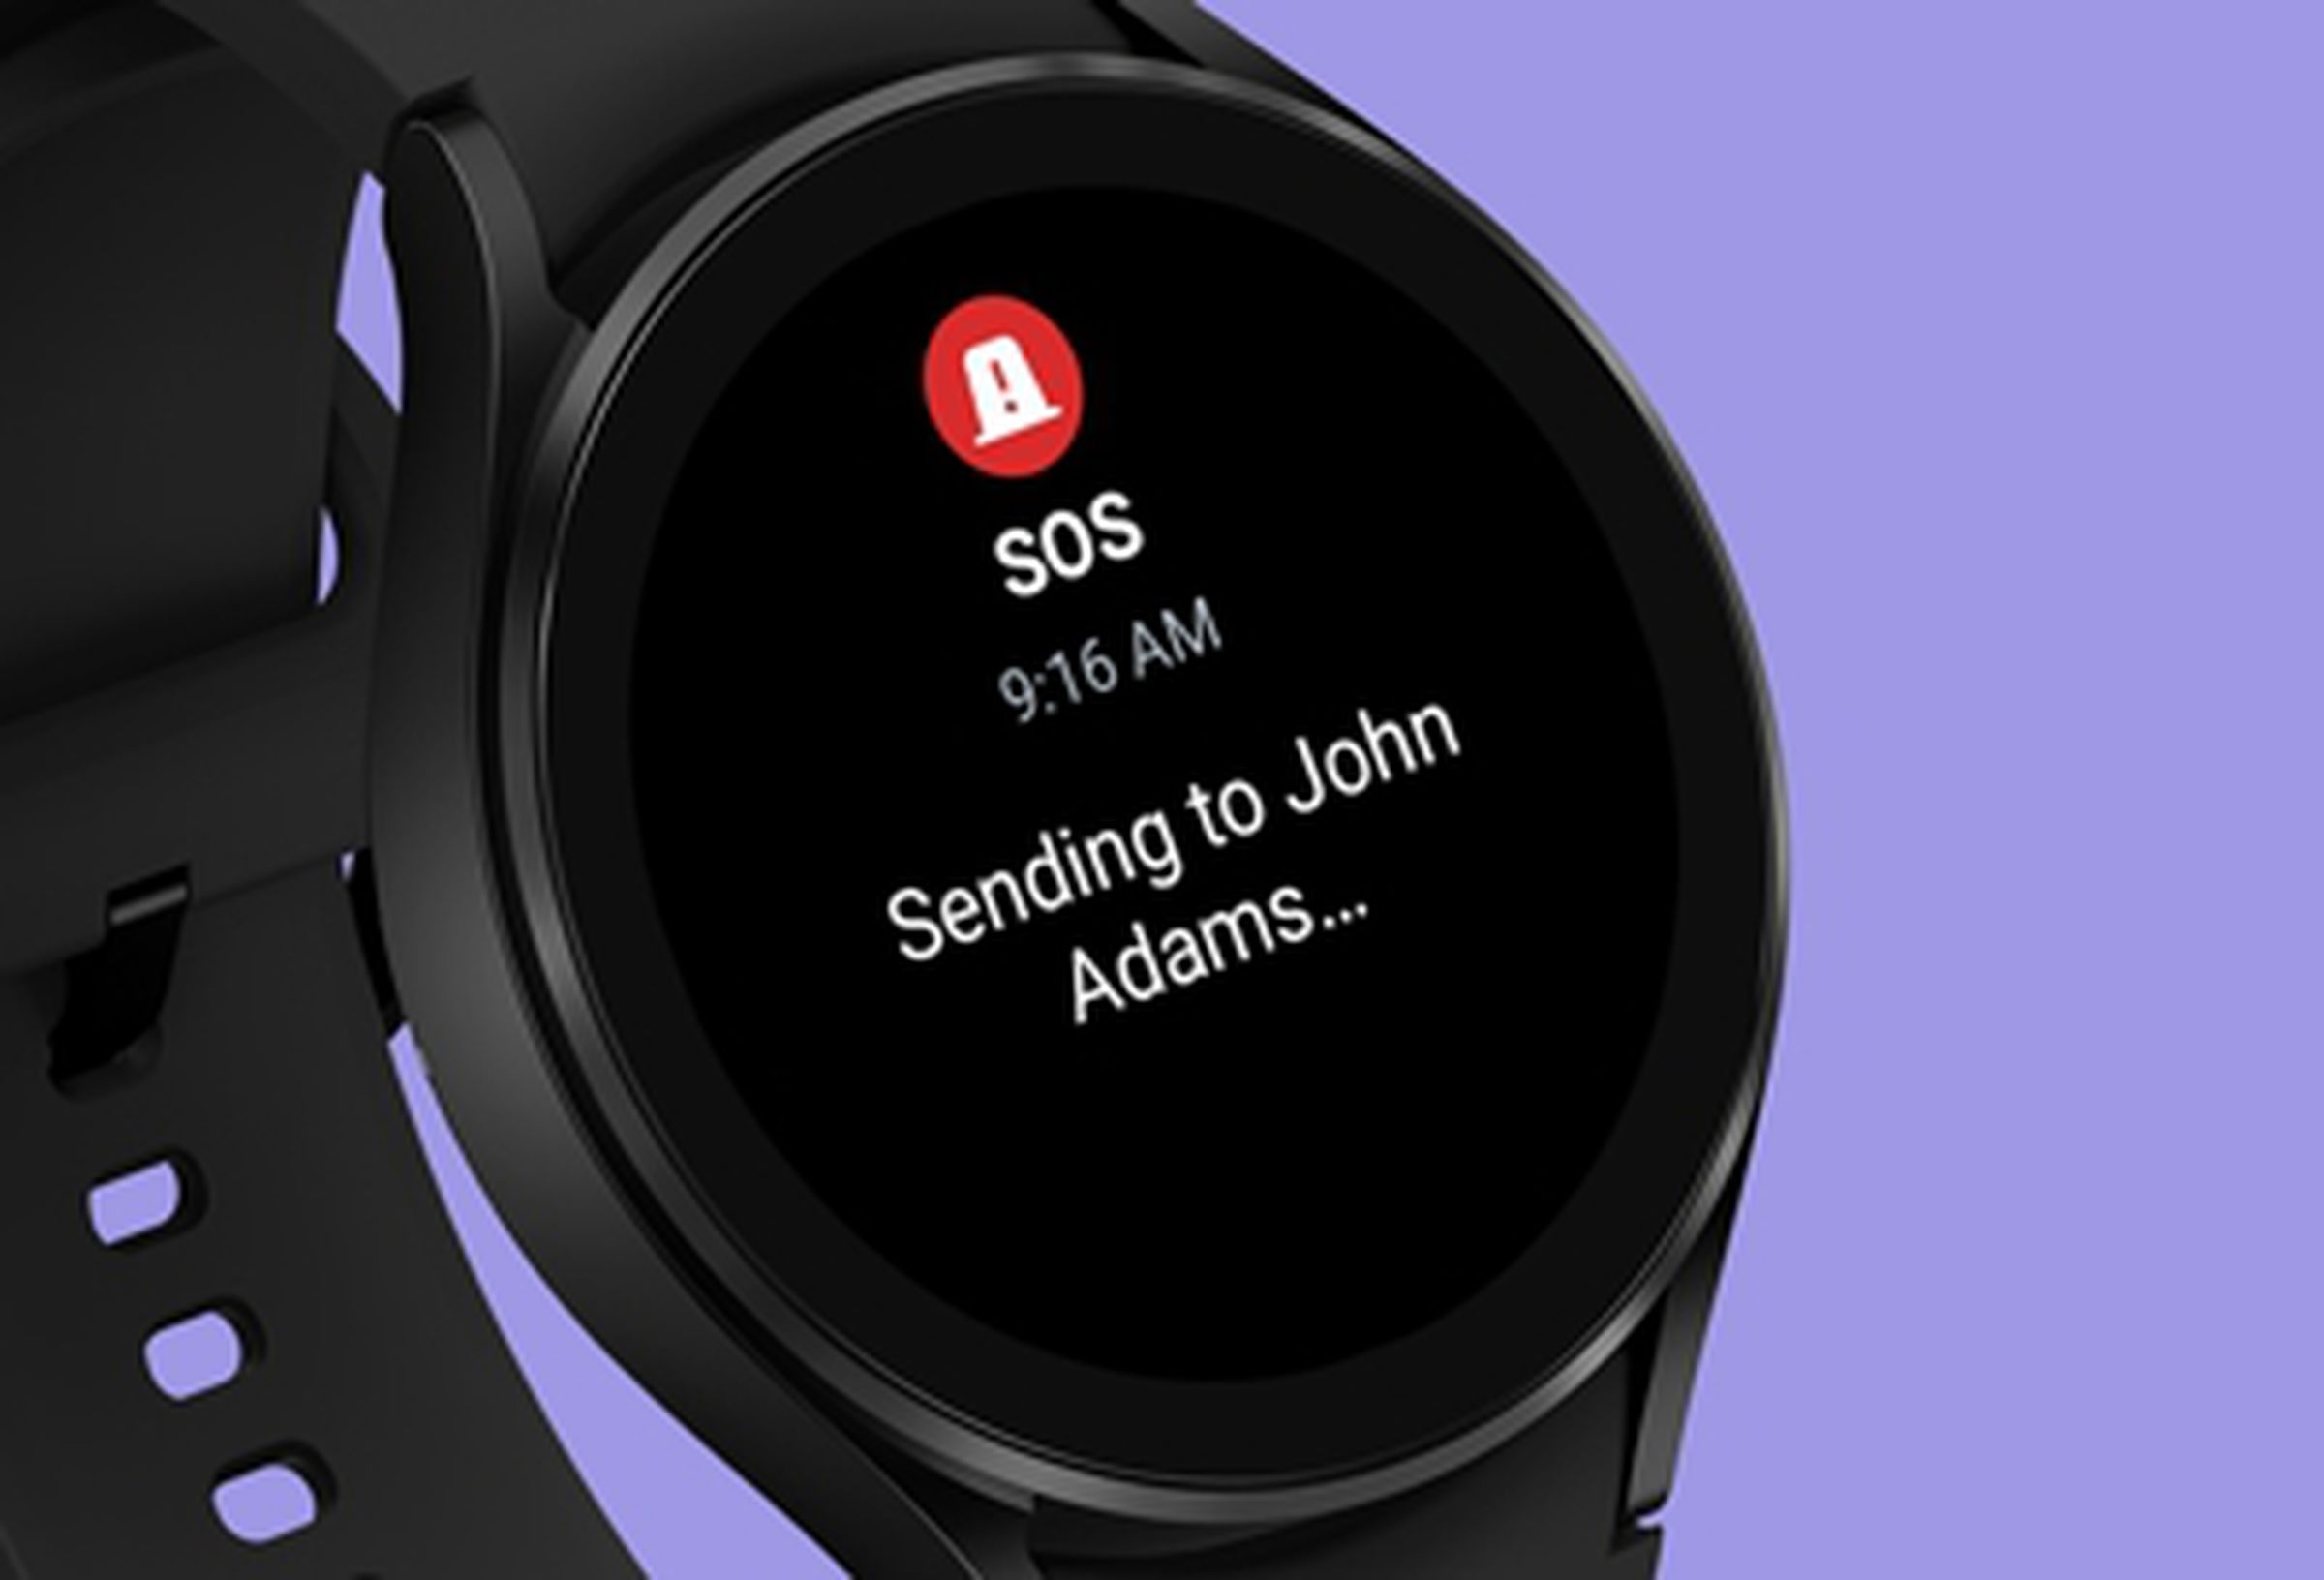 Emergency SOS is not set up by default on Samsung smartwatches. You’ll have to enable it yourself.